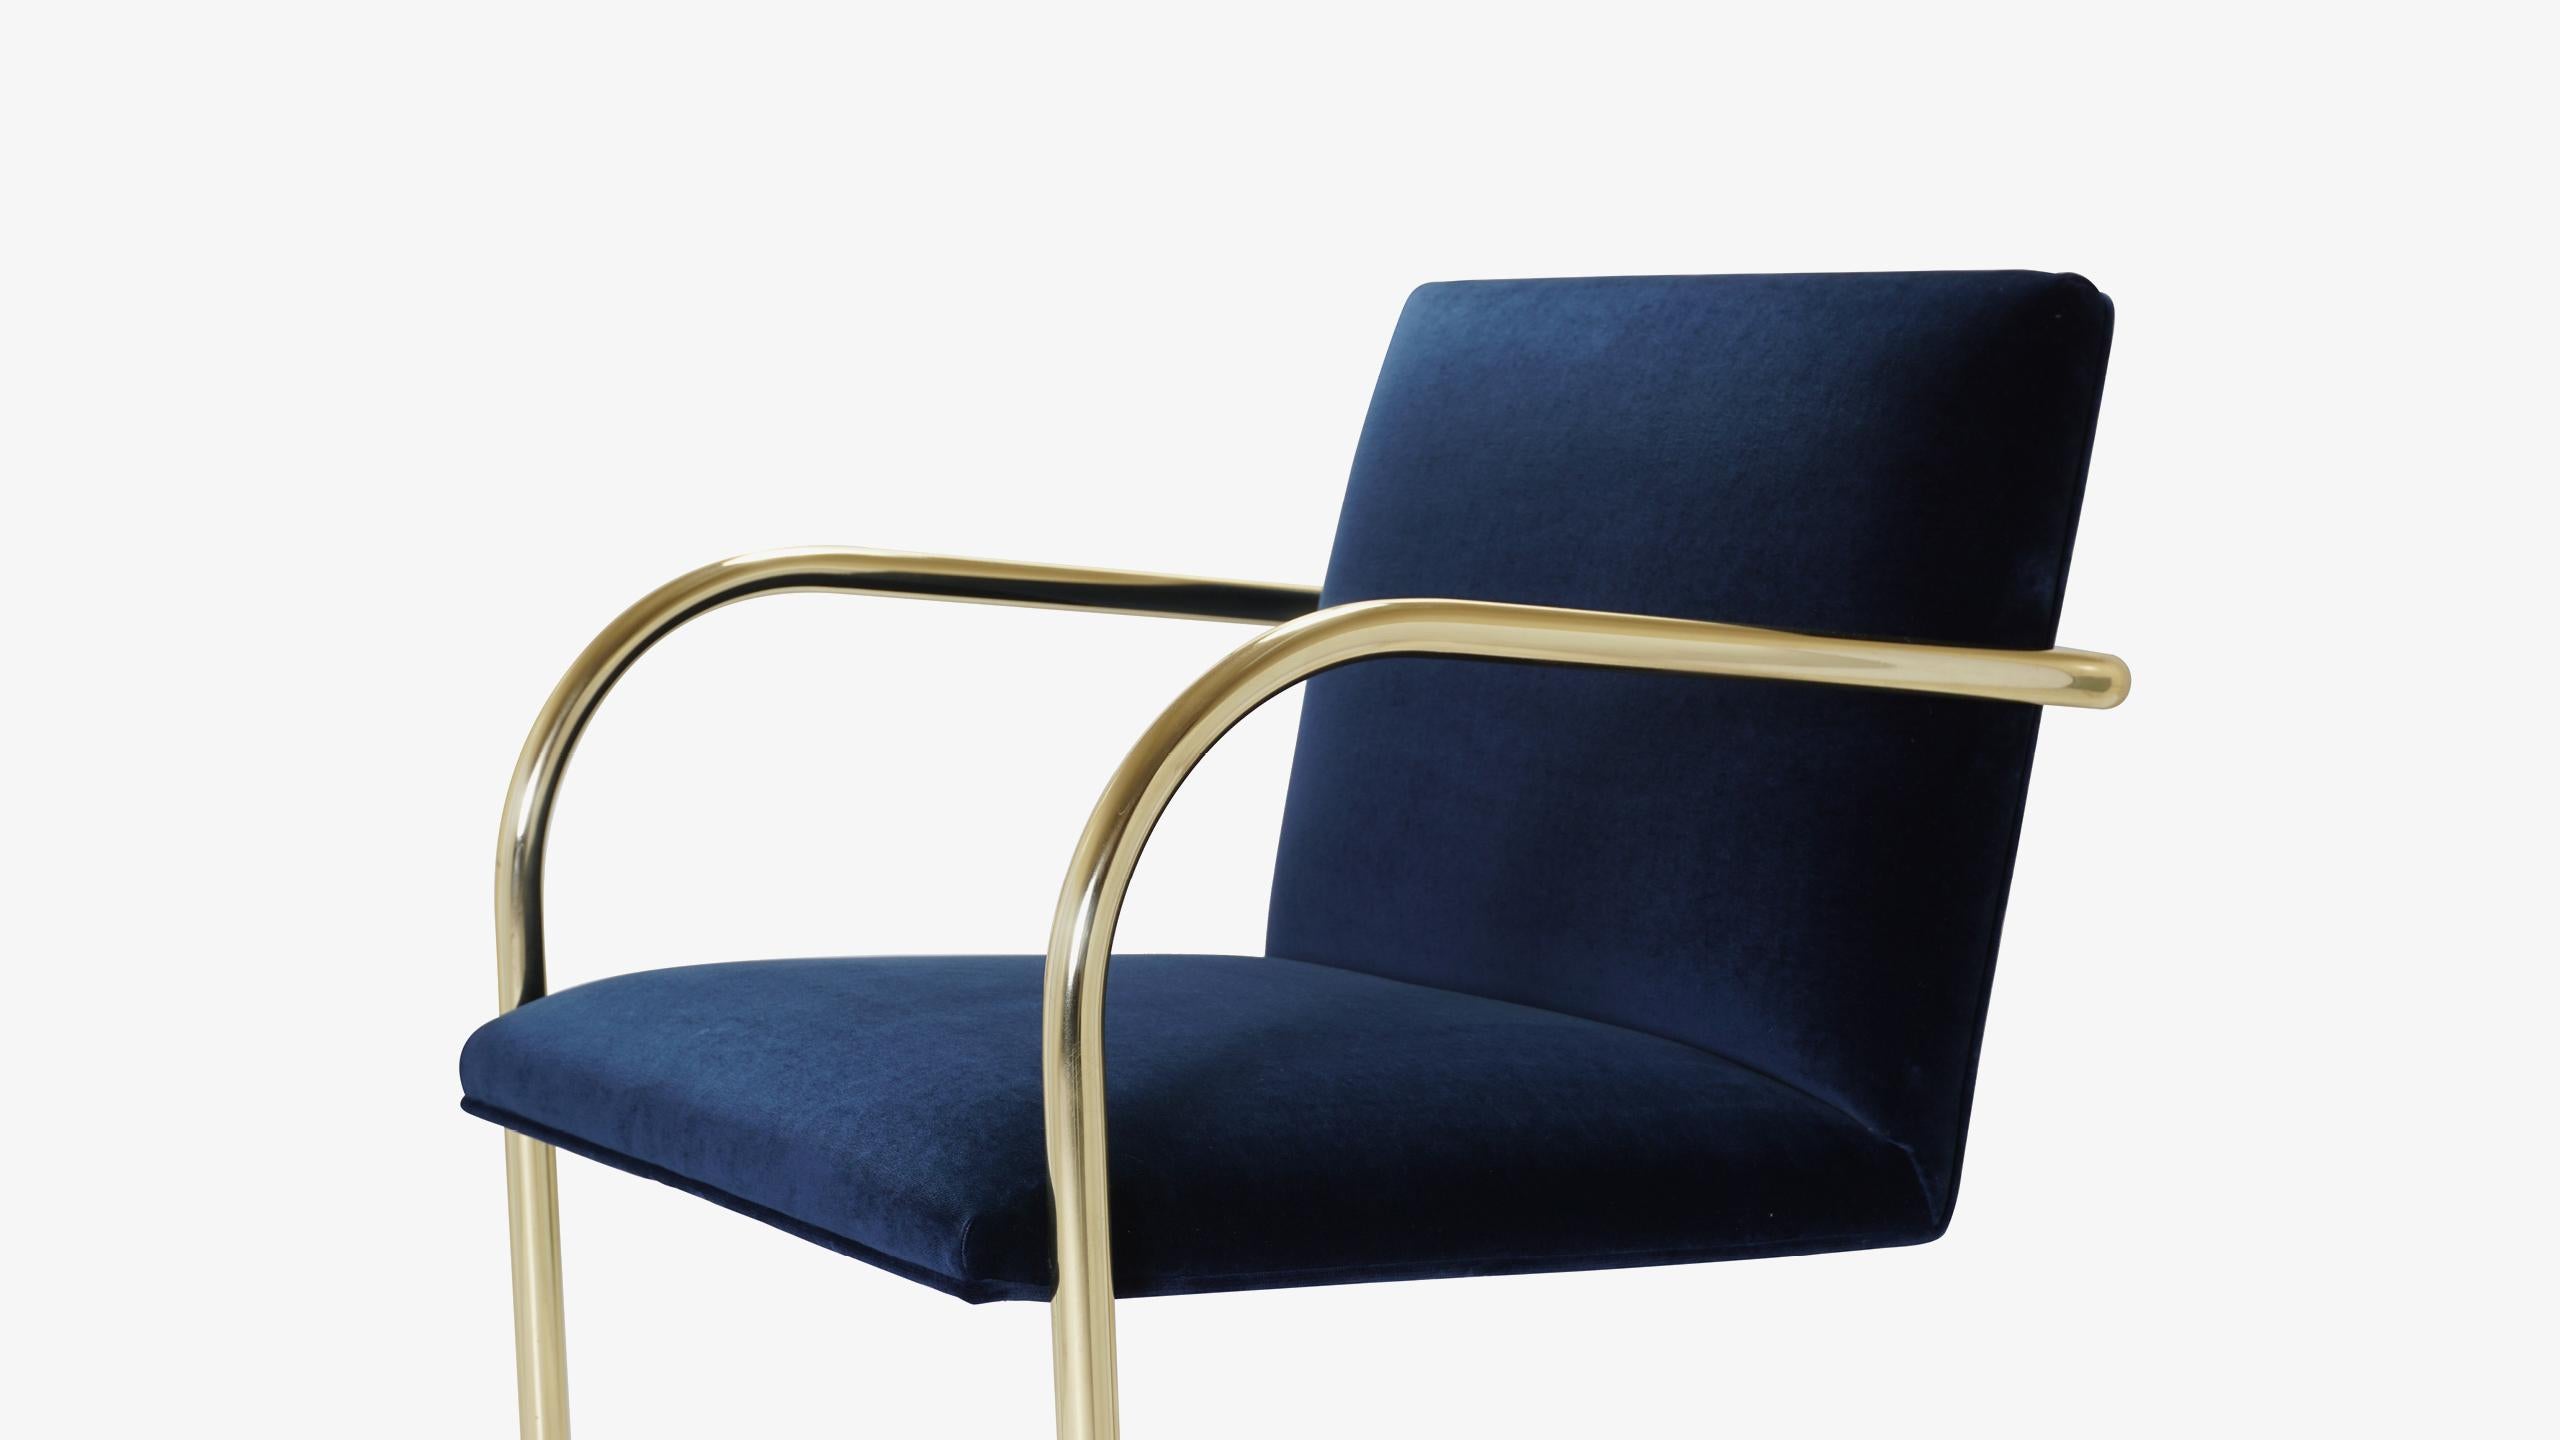 Brno Tubular Chairs in Navy Velvet Polished Brass by Mies Van Der Rohe for Knoll In Excellent Condition For Sale In Wilton, CT